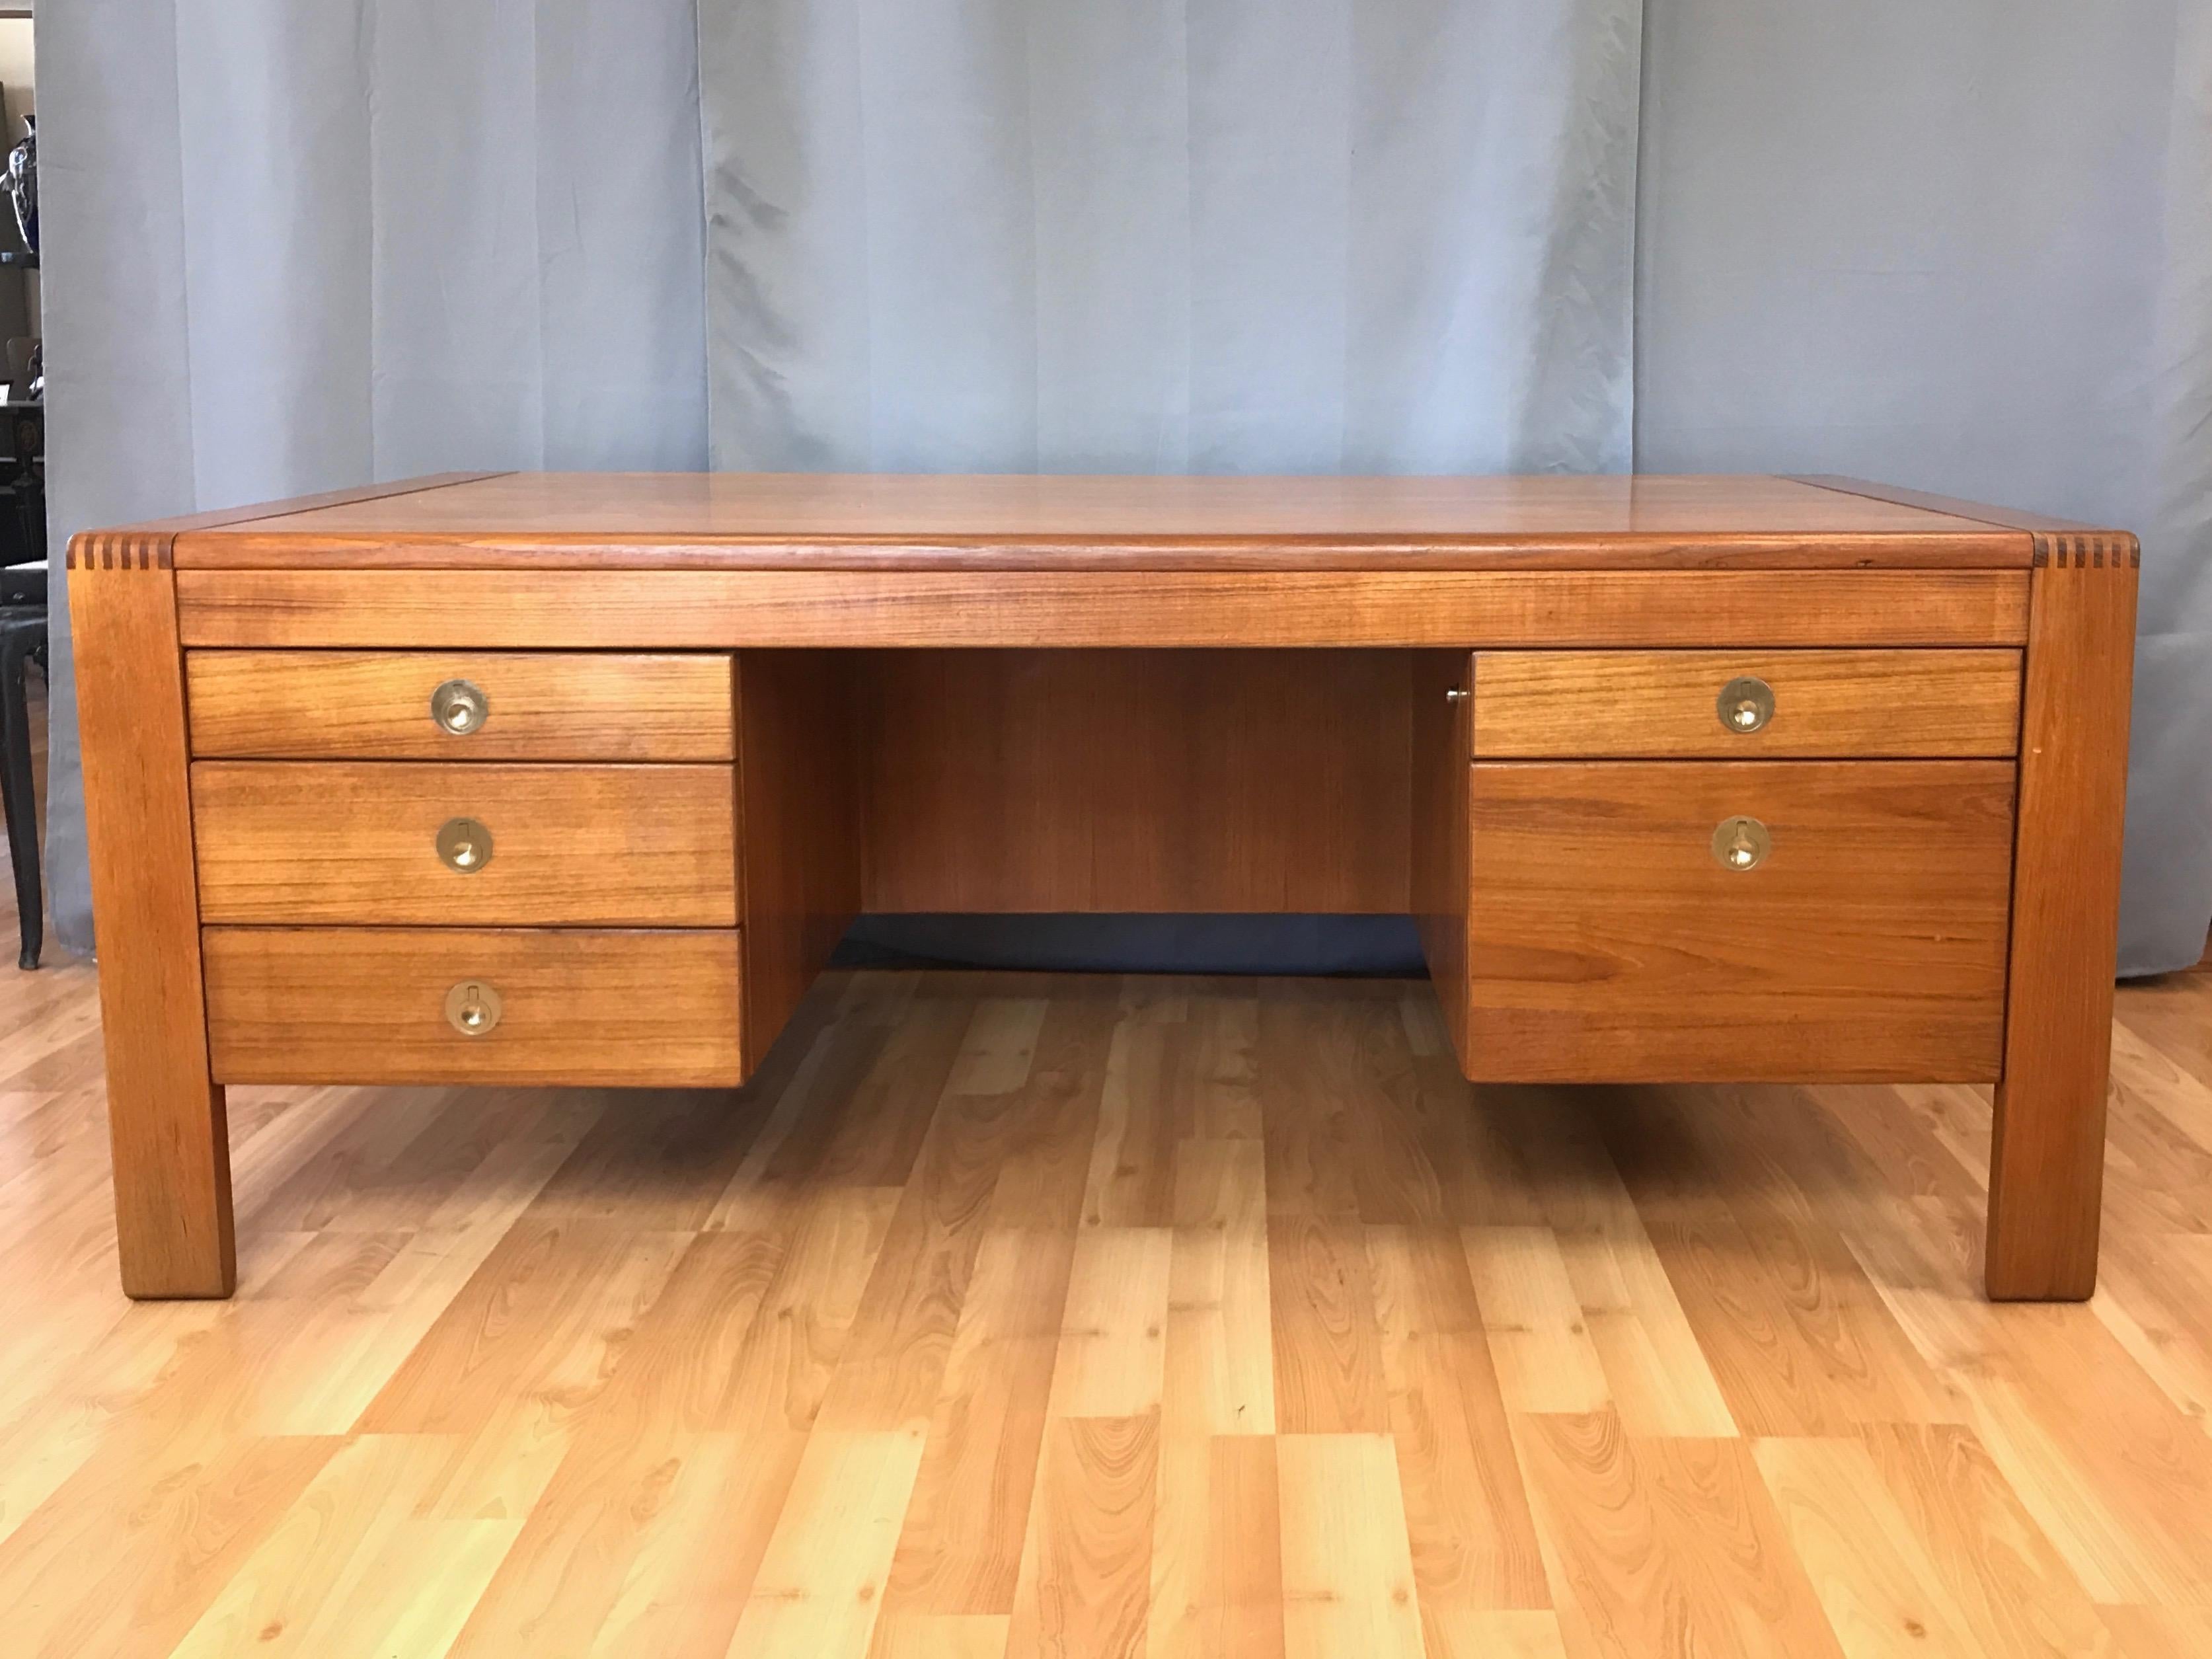 A large, well-crafted, and impressive 1970s teak executive desk by D-Scan.

Clean Danish modern-inspired design distinguished by 3.75” wide solid teak legs with exposed finger joinery in the style of Niels Bach or Peter Hvidt. Expansive top